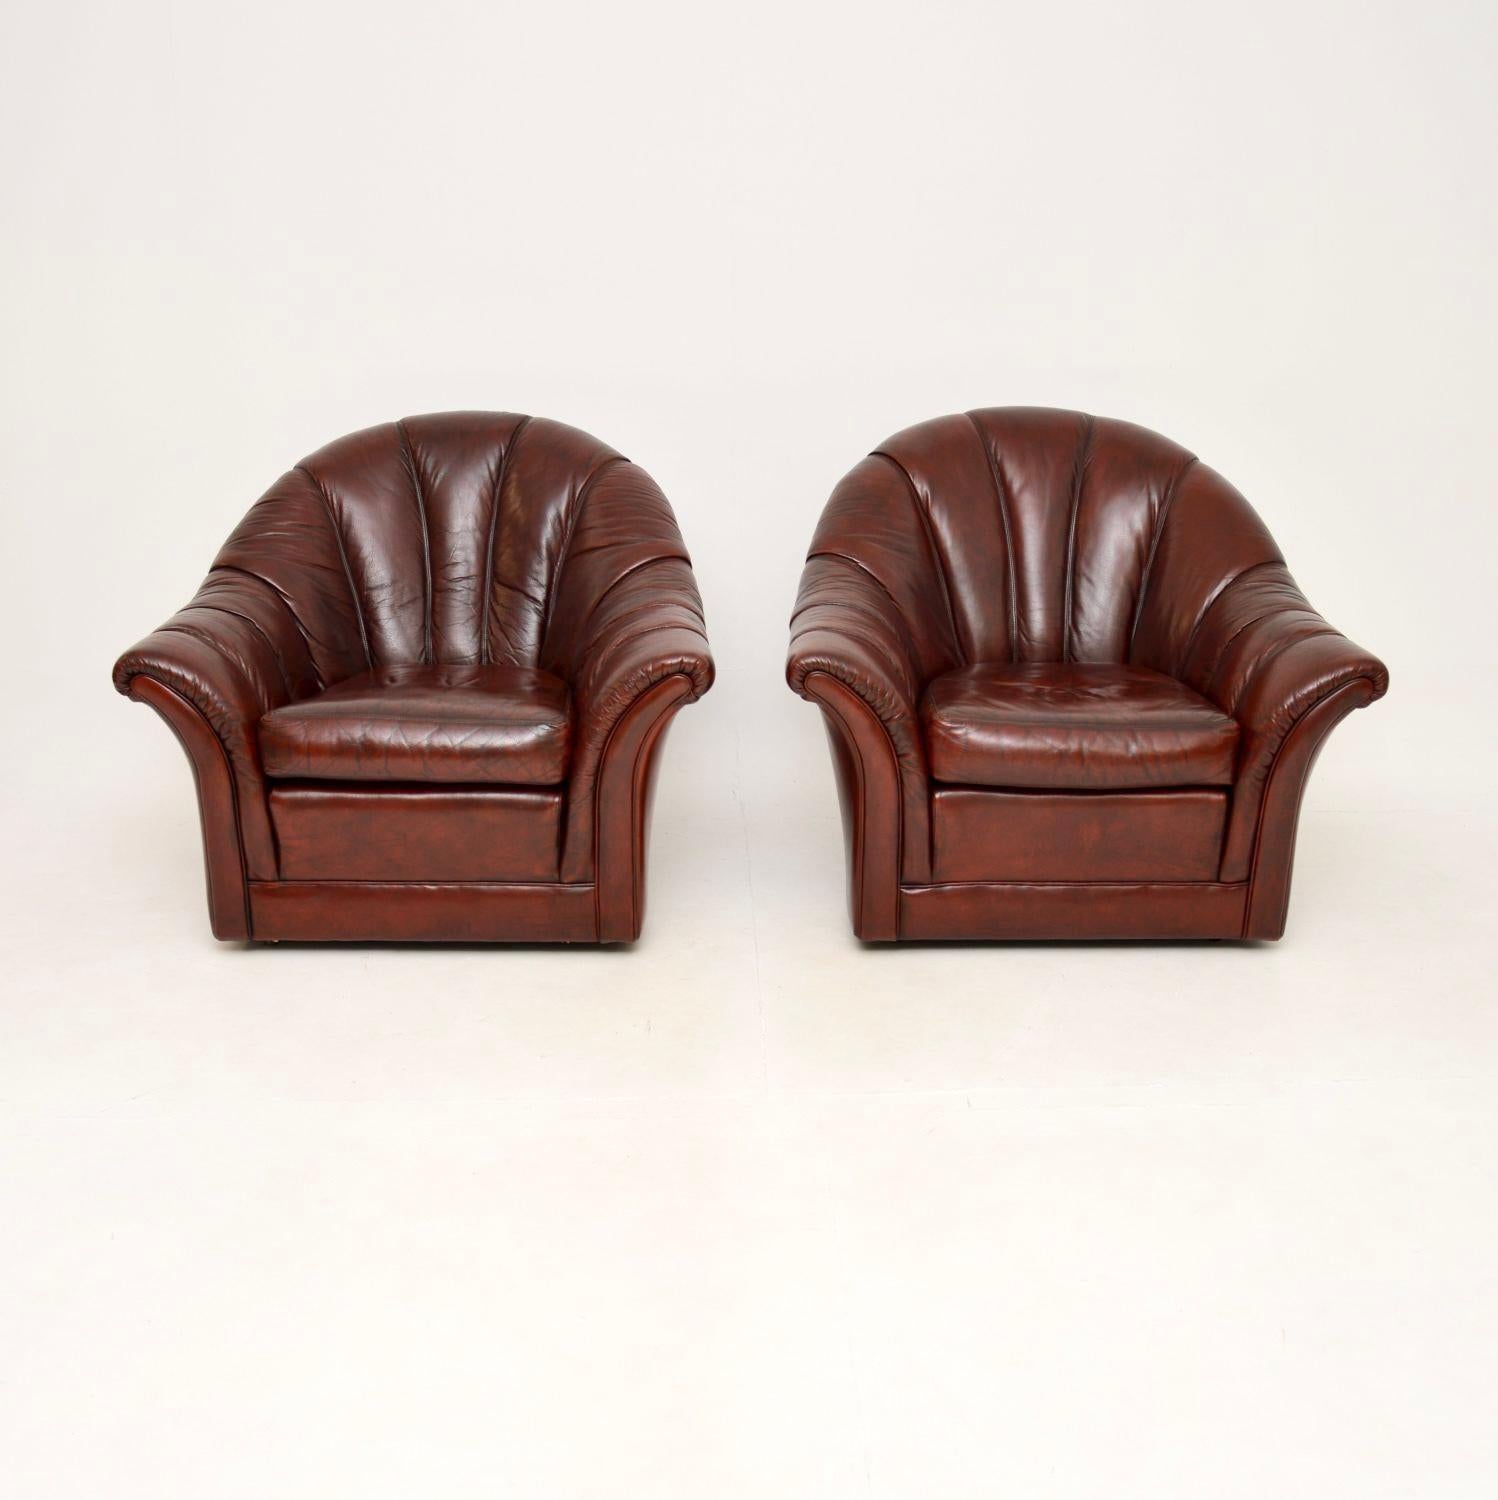 A stylish and extremely comfortable pair of vintage leather scallop back armchairs. They were made in England, they date from around the 1970’s.

The quality is superb, they are very generous and roll smoothly on casters. The scalloped backs give